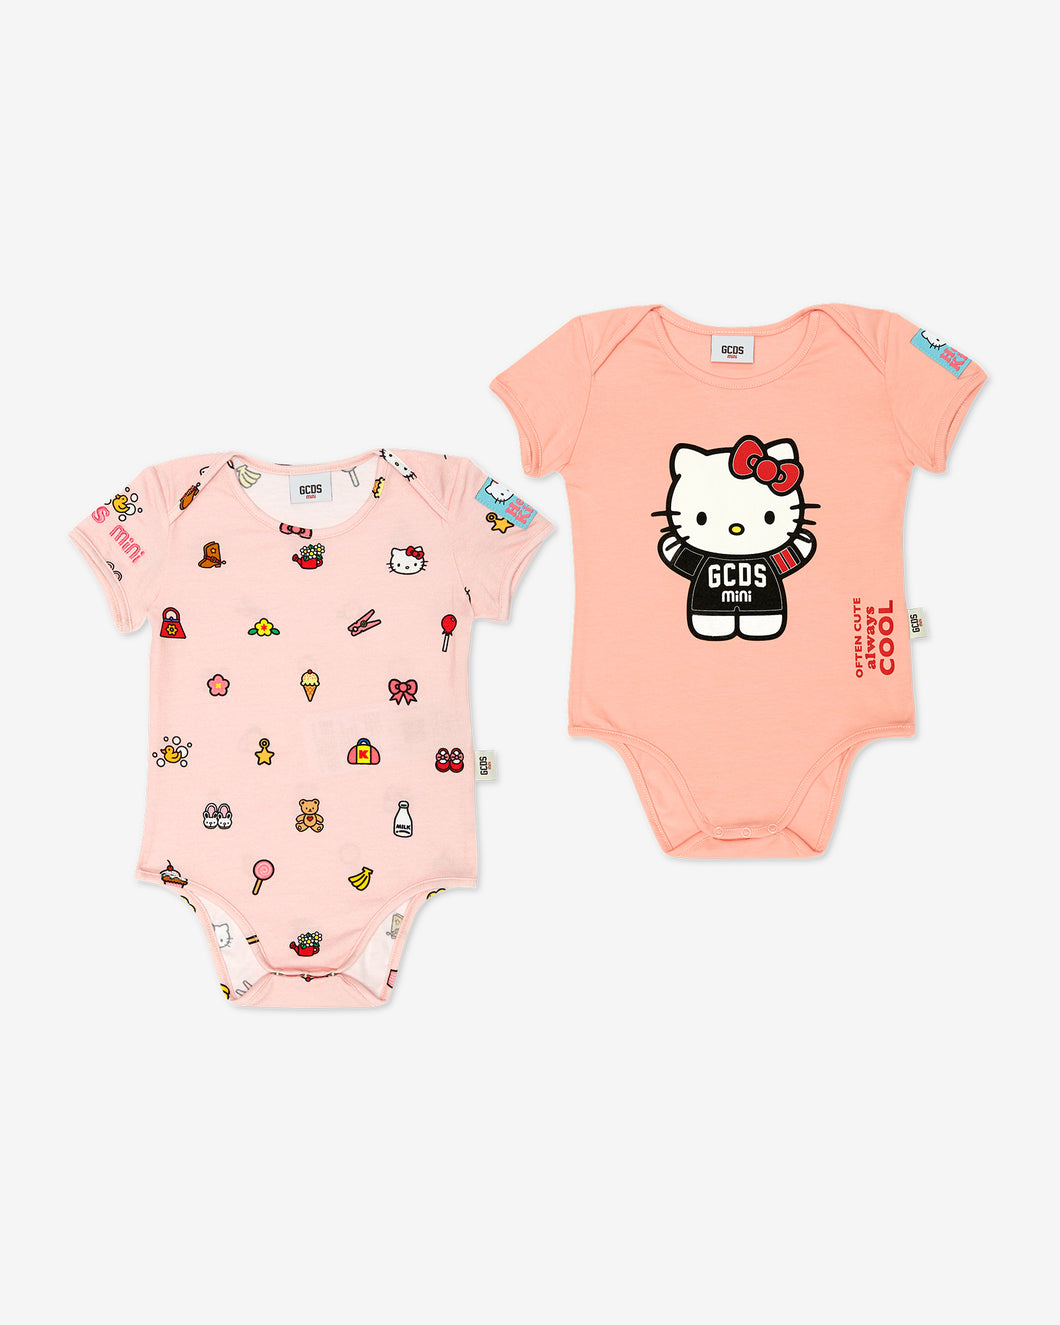 Hello Kitty Two-Piece Baby Bodysuit Set: Girl Playsuits and Gift Set Pink | GCDS